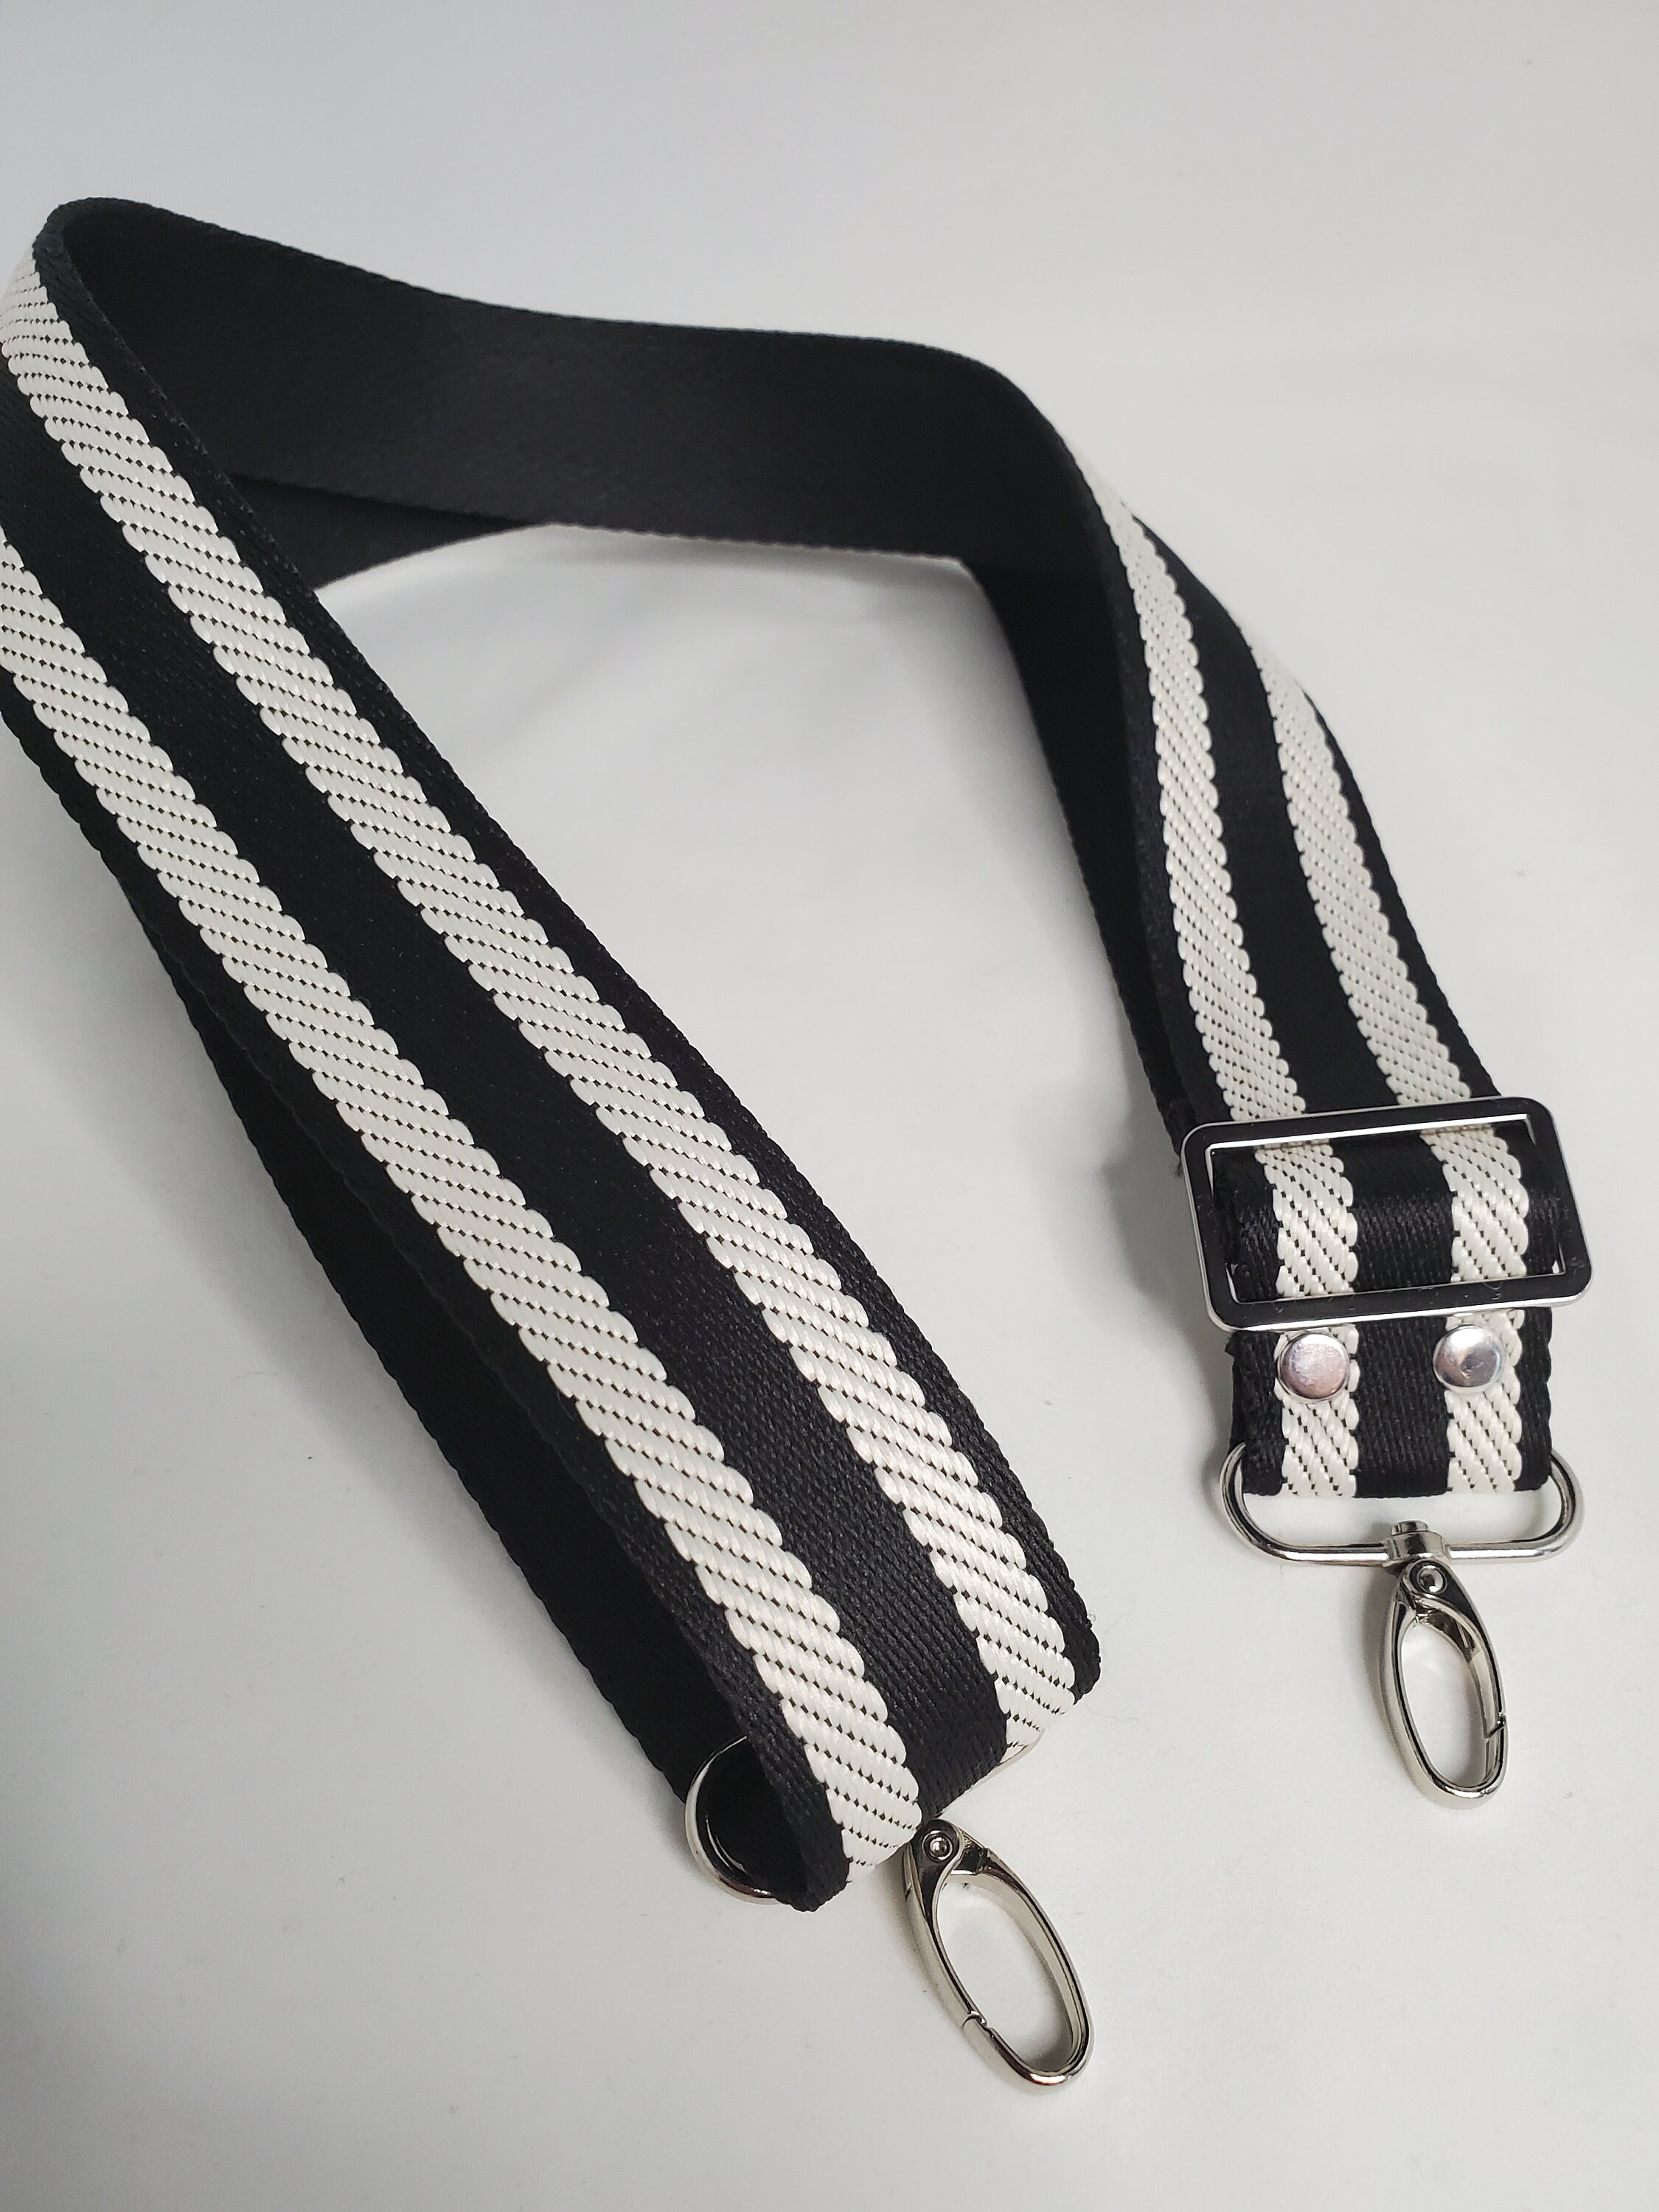 Adjustable Bag Strap Black and White Striped 1.5 Cotton | Etsy